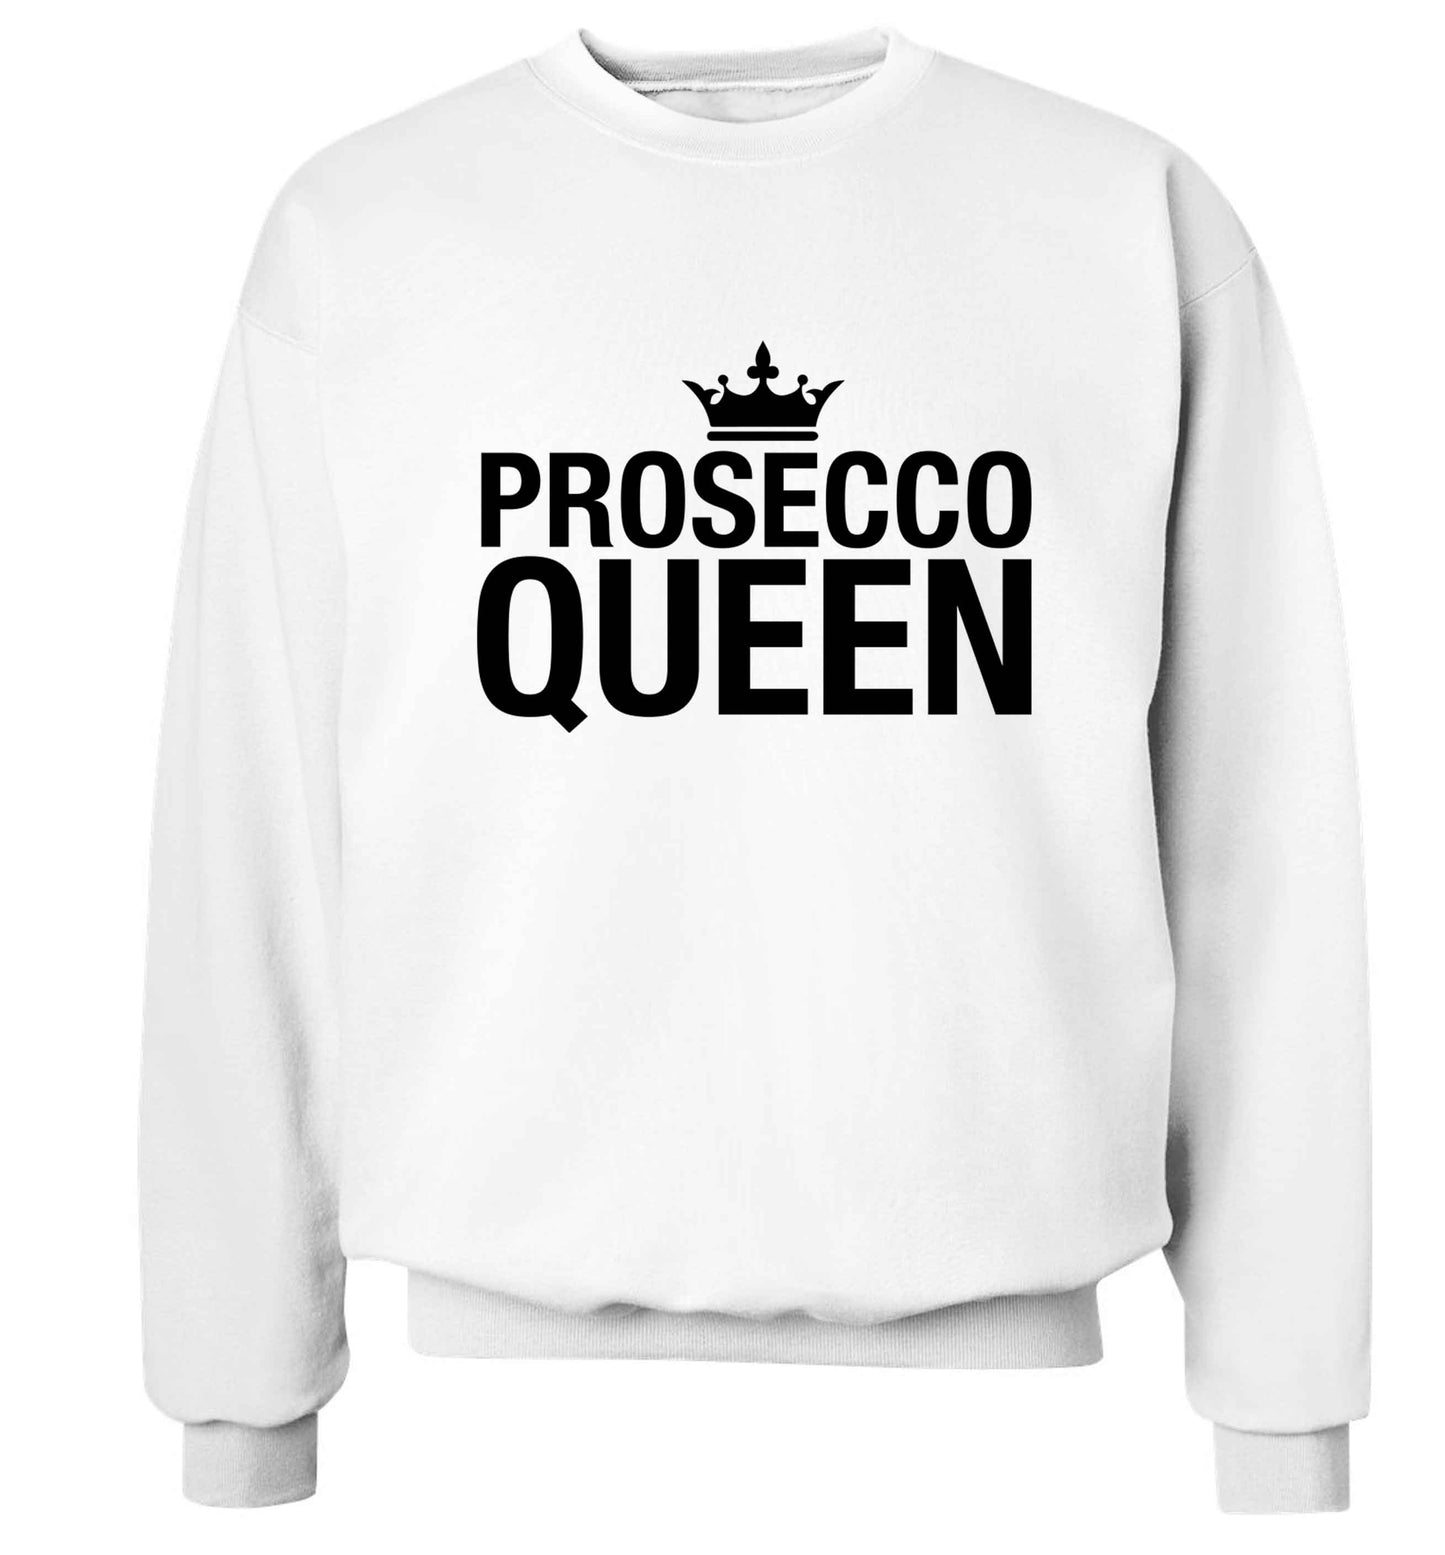 Prosecco queen Adult's unisex white Sweater 2XL